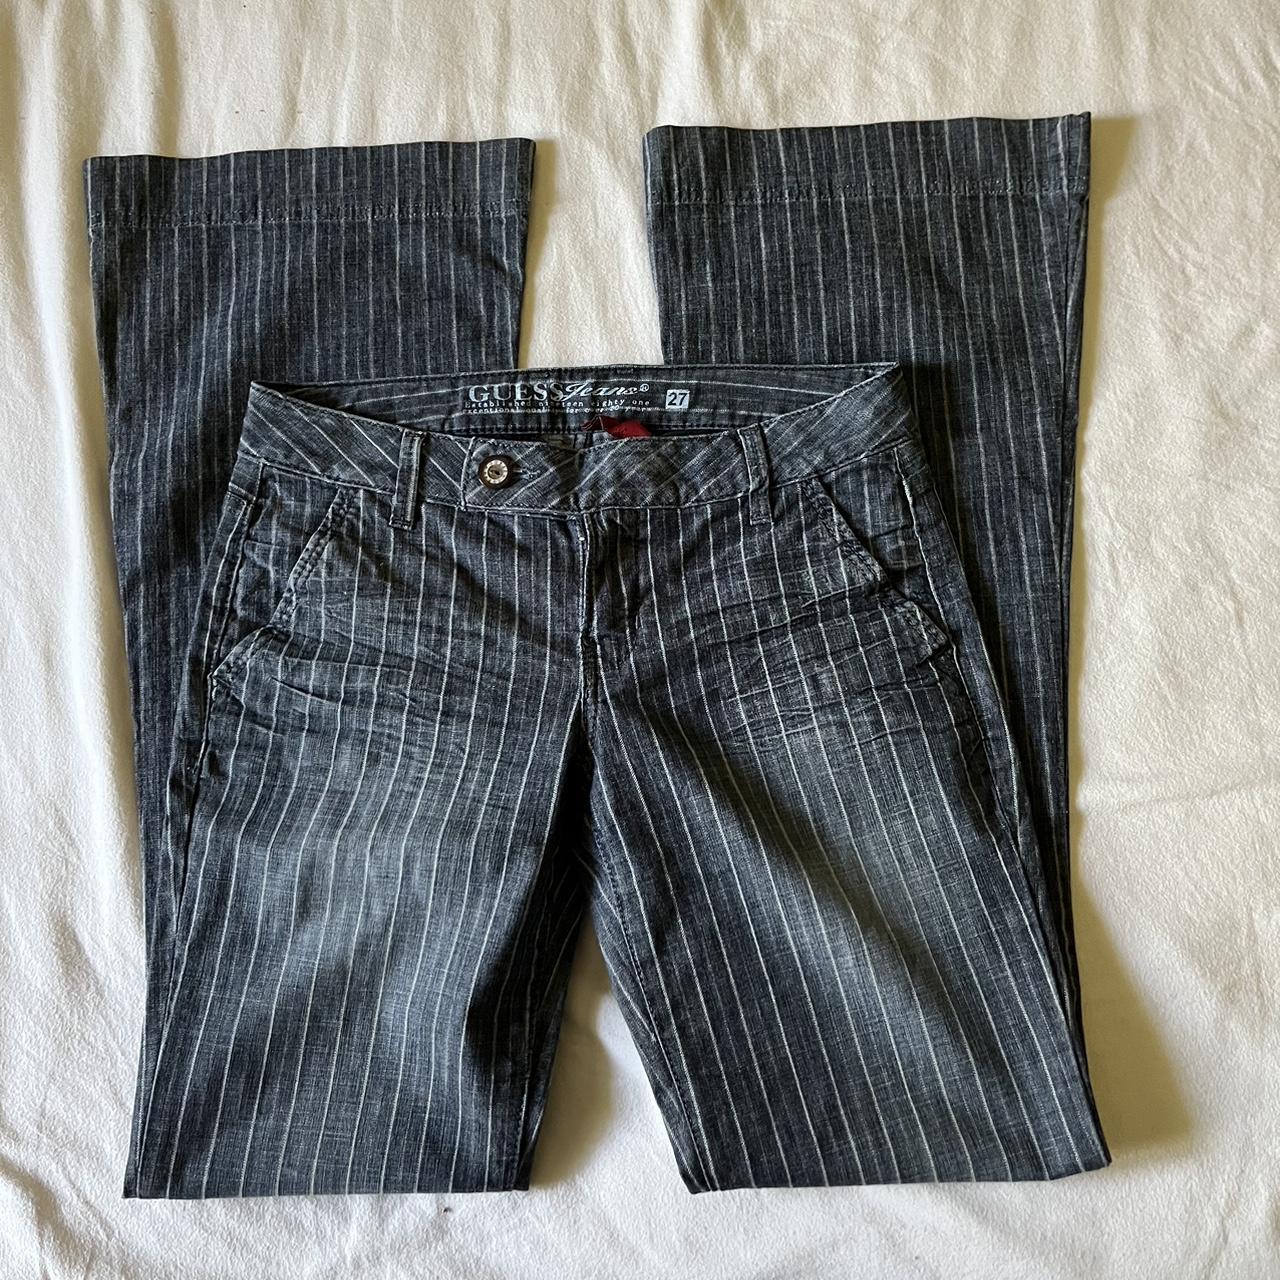 Guess Women's Grey and White Jeans